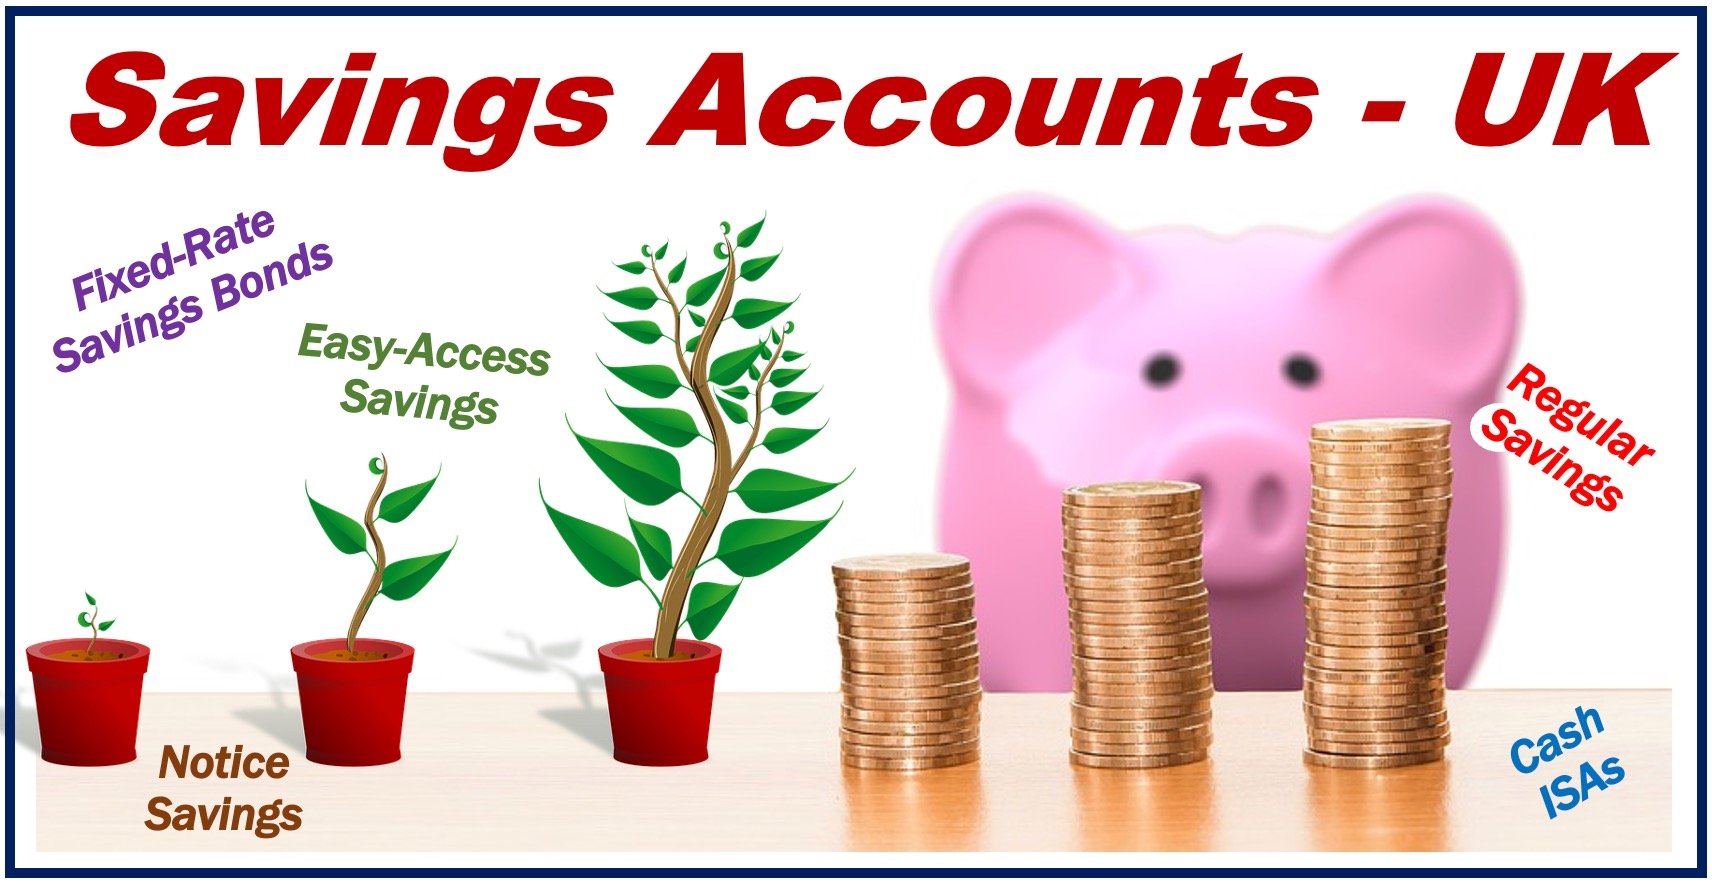 Types of savings accounts in the UK